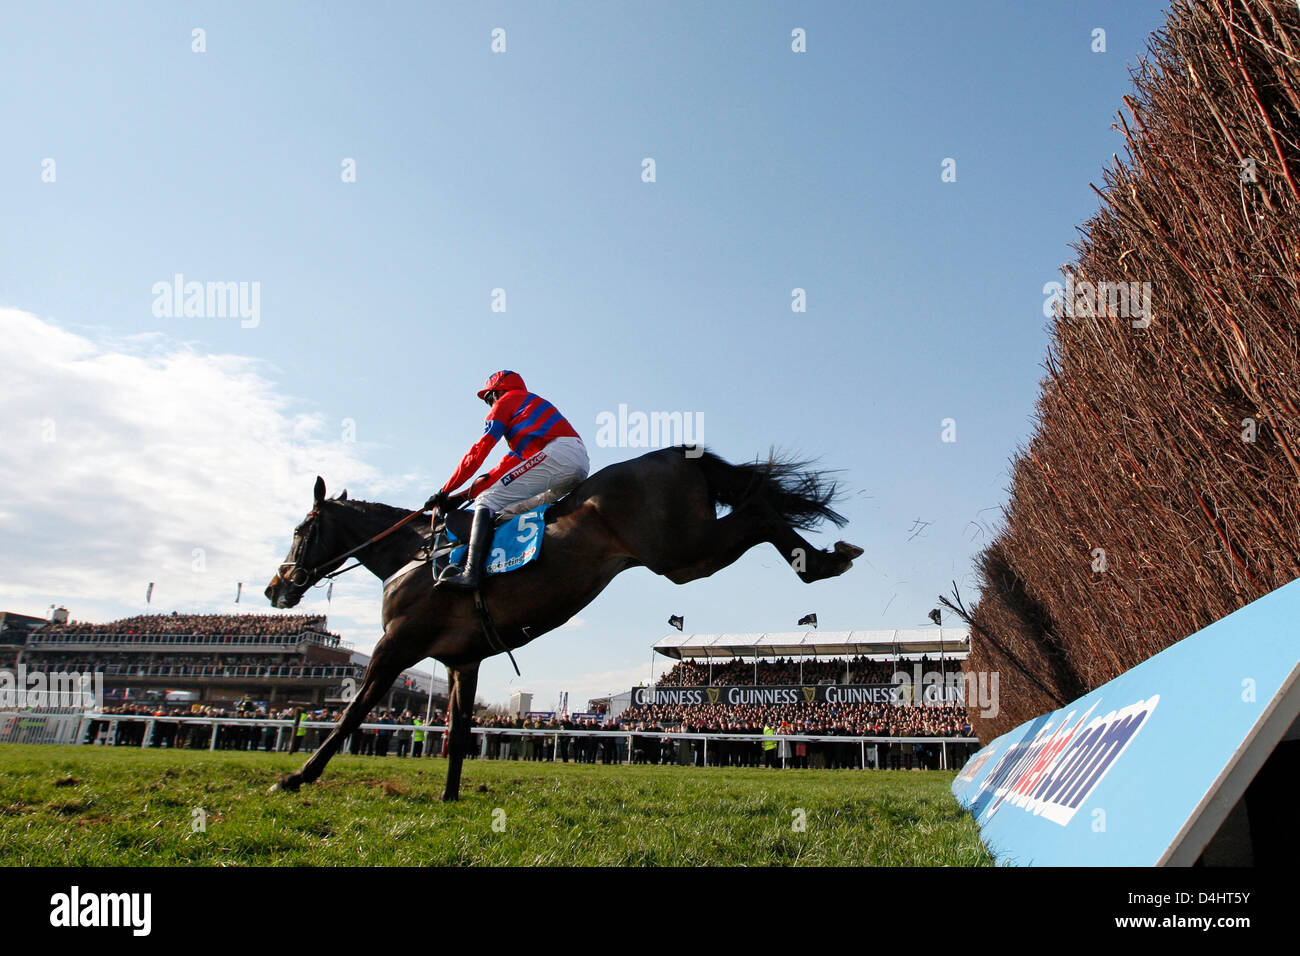 Cheltenham, UK. 13th March 2013.  Alternative view from the bottom; Sprinter Sacre, ridden by Barry Geraghty wins the sportingbet.com Queen Mother Champion Chase Grade 1. Credit:  dpa picture alliance / Alamy Live News Stock Photo